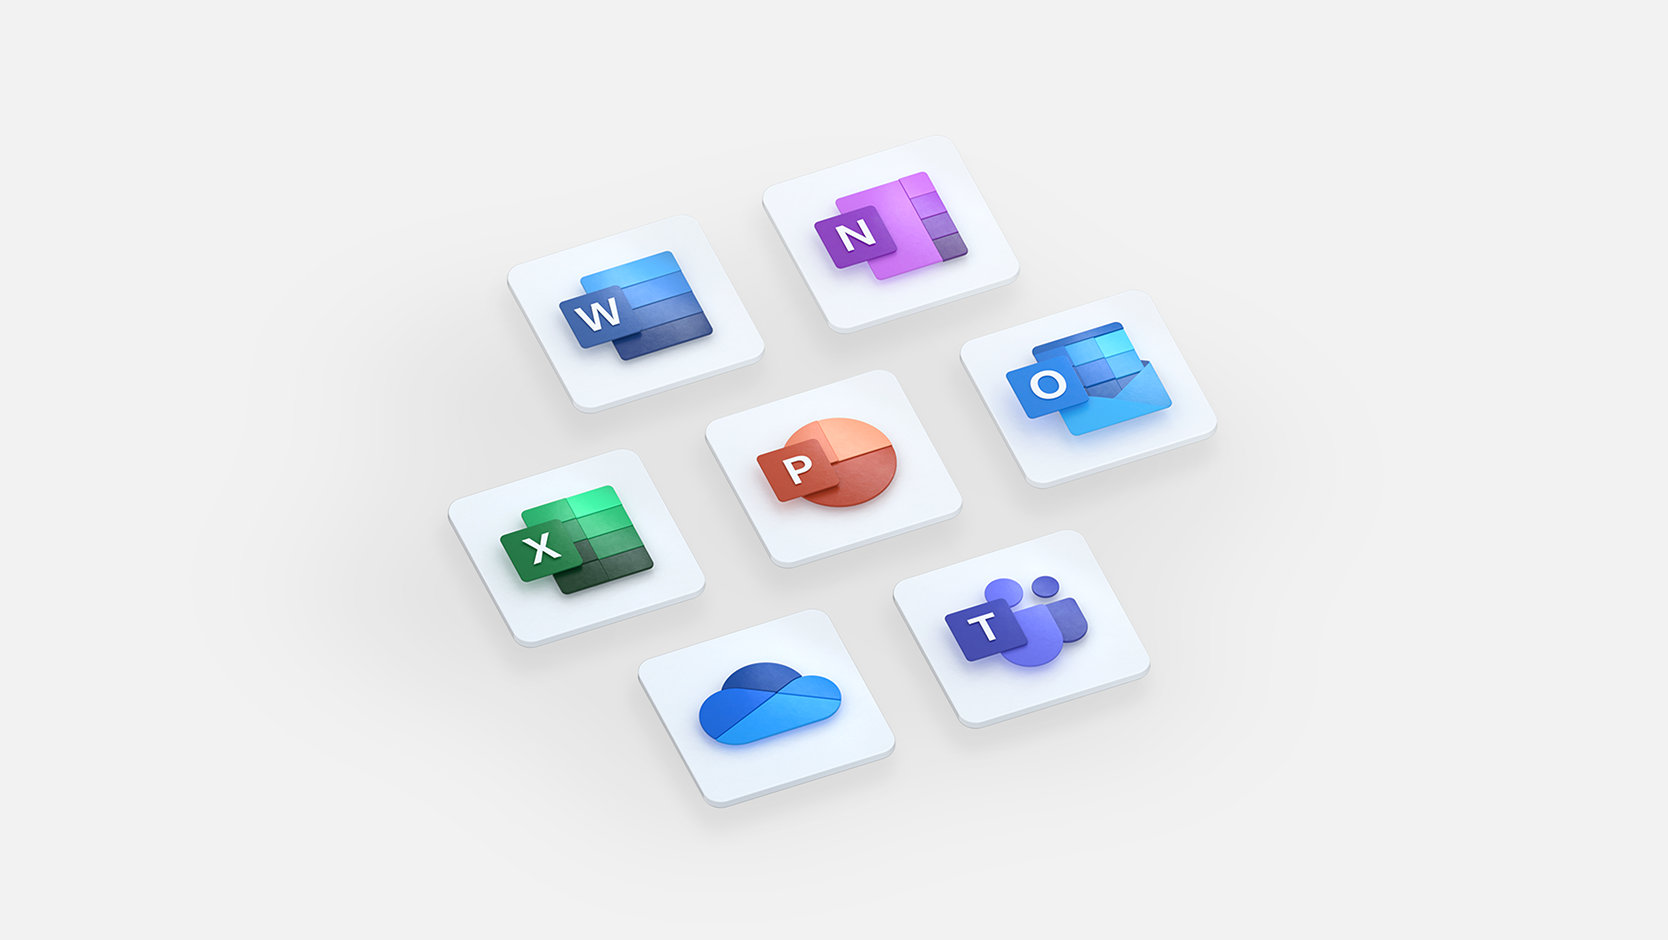 The apps included in a Microsoft 365 subscription: Word, OneNote, Excel, PowerPoint, Outlook, OneDrive, and Microsoft Teams.